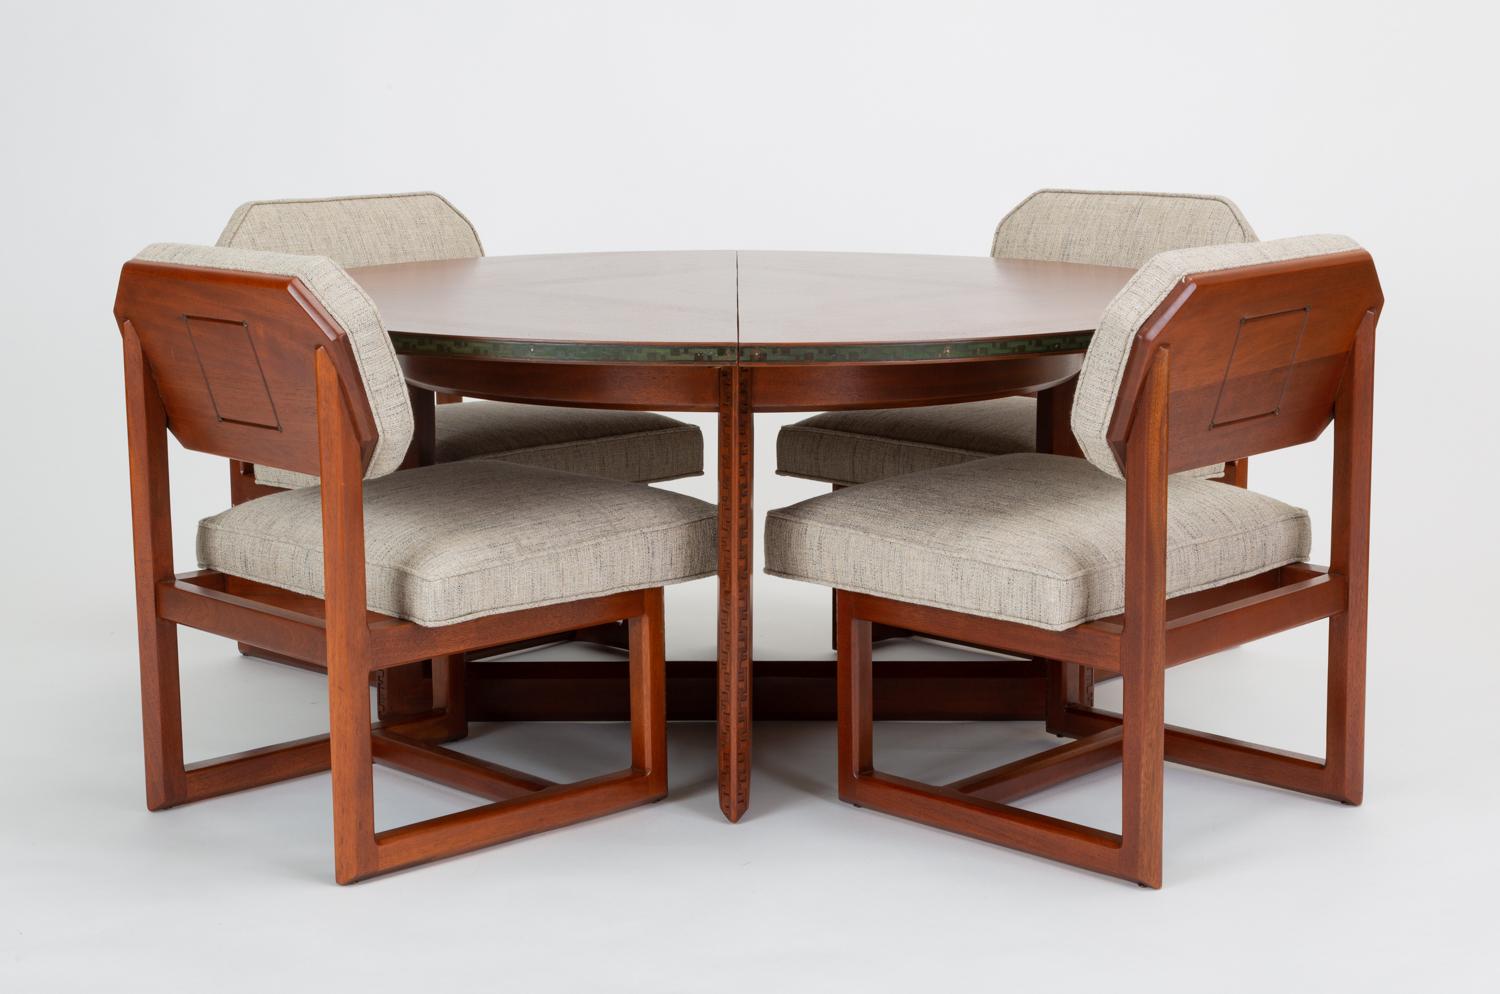 A low game table with four matching chairs designed in 1955 by Frank Lloyd Wright for Heritage Henredon. The line, dubbed “Taliesin” after Wright’s Wisconsin estate, combined essential geometric forms - circle, triangle, hexagon - to create an